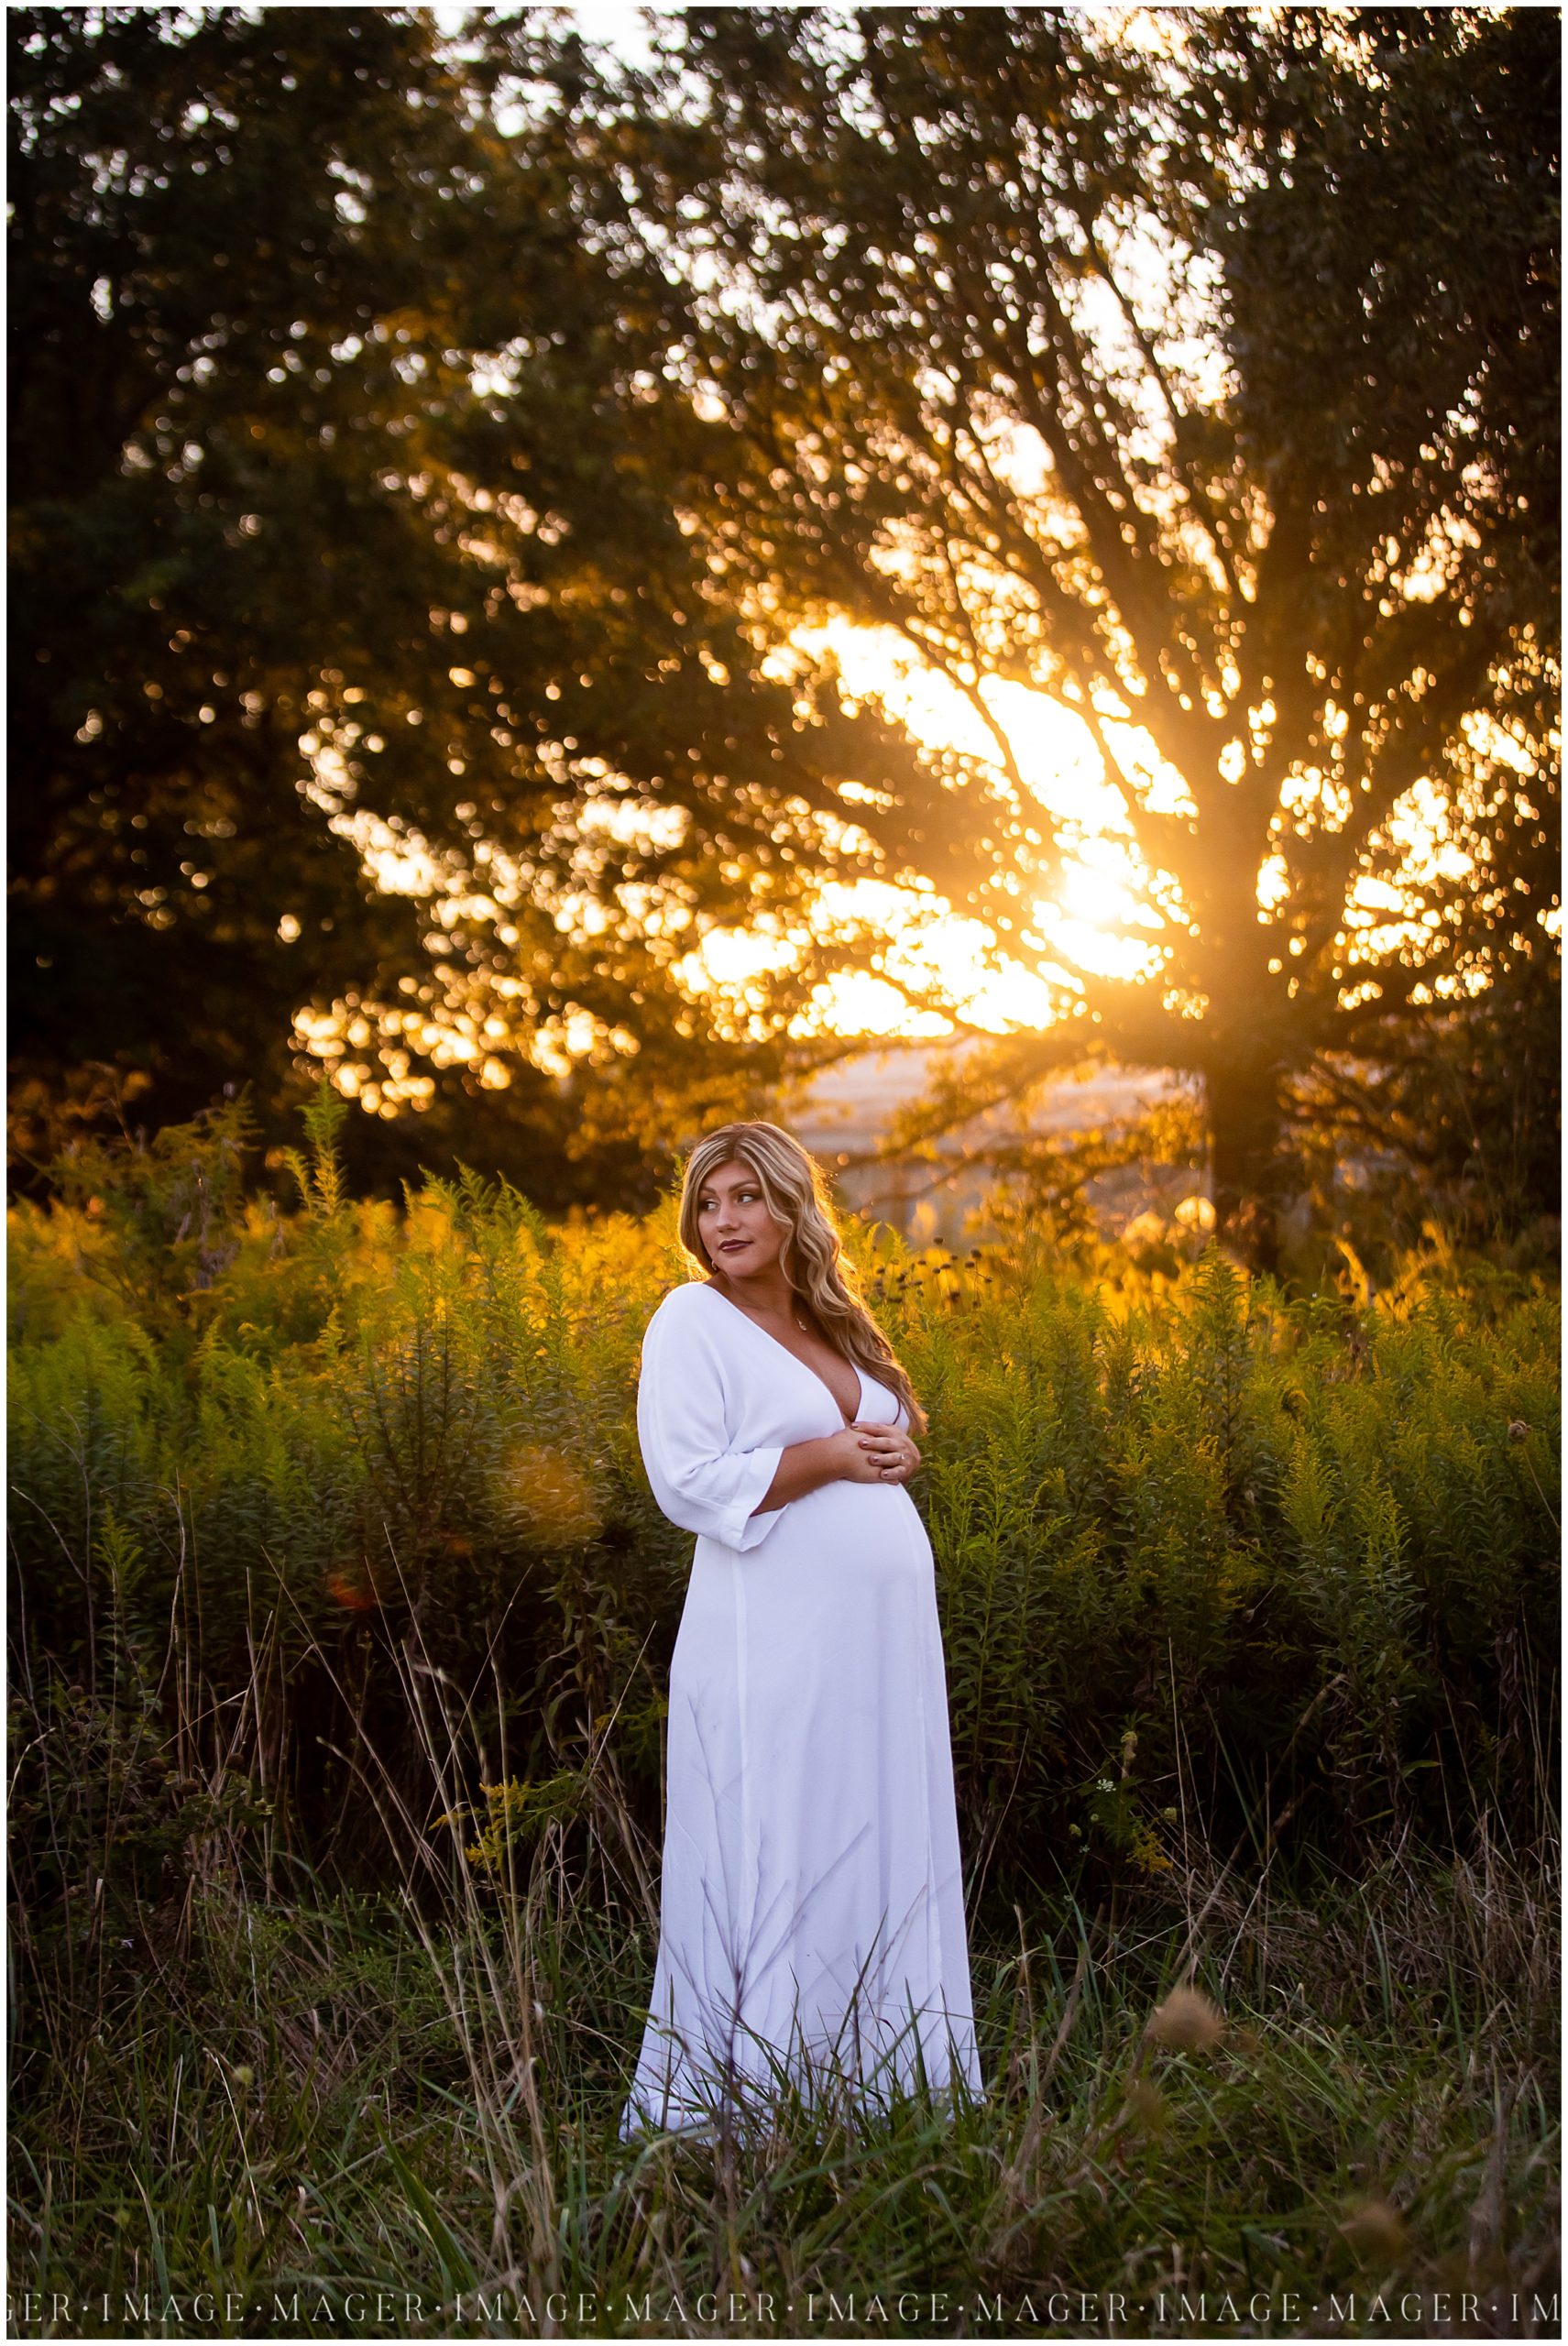 central-illinois-maternity-baby-middlefork-grass-nature-sunset